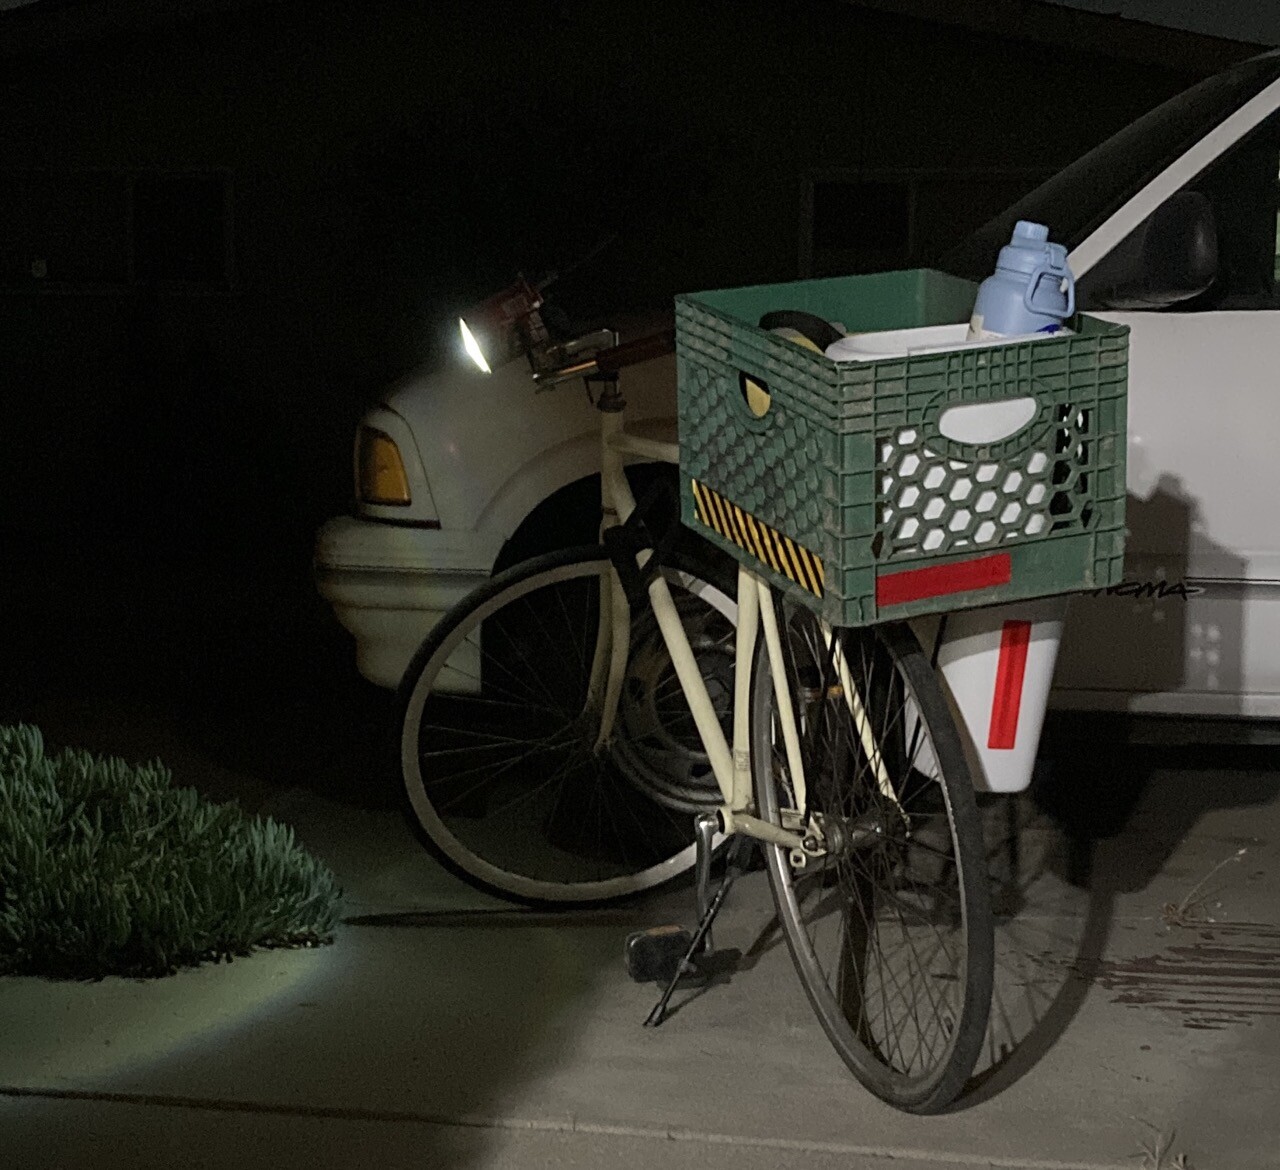 single speed bike with crate and bucket mounted to a rear rack, and the cantern shining majestically in the night